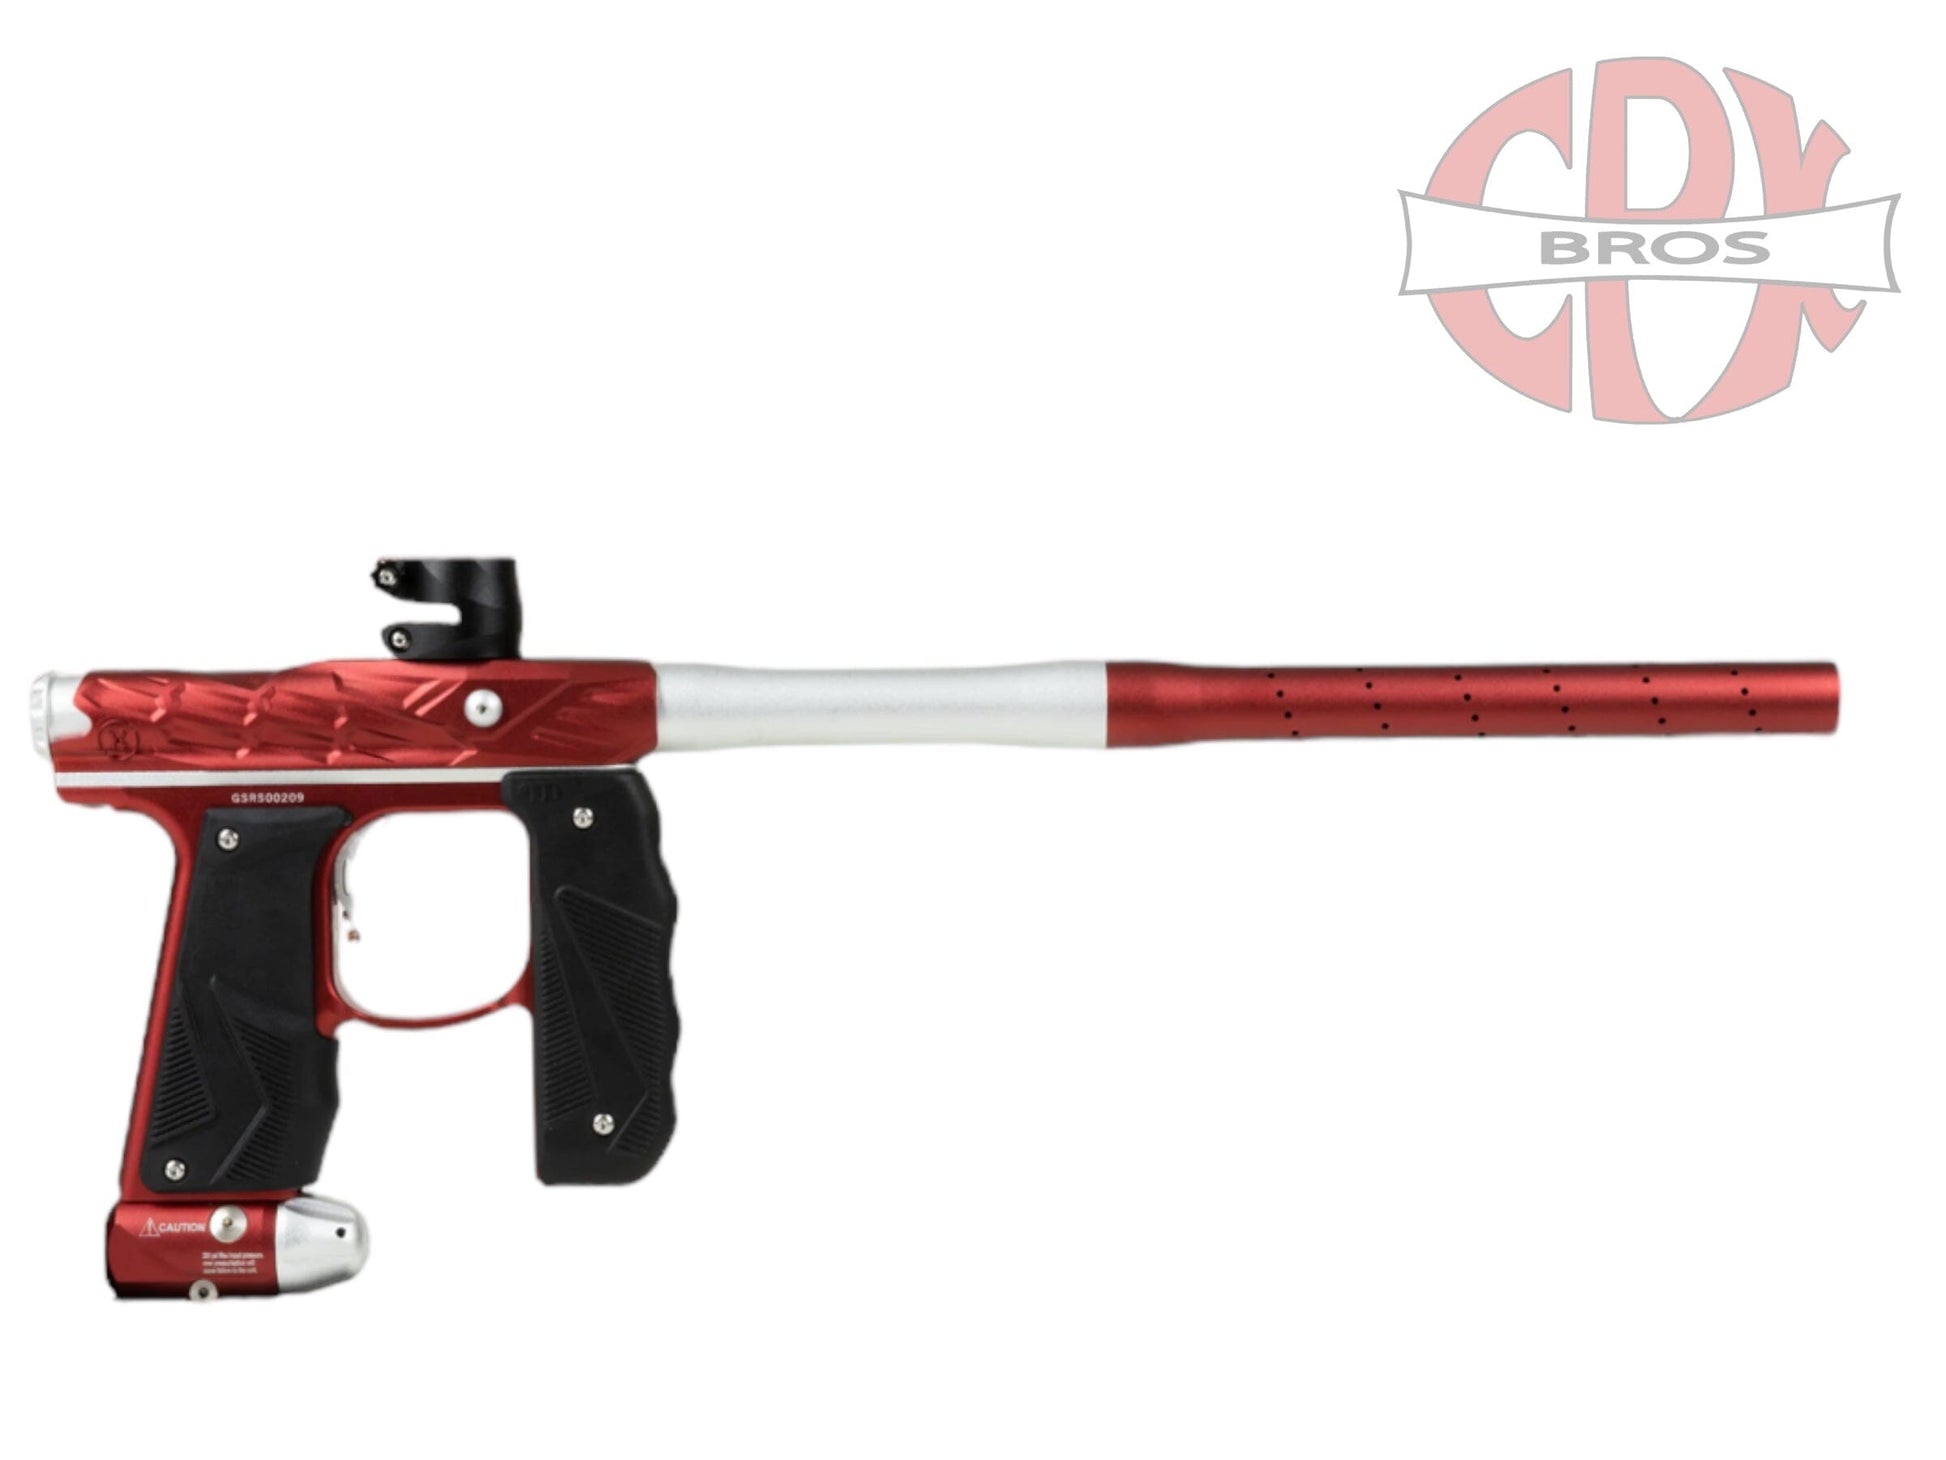 Used HK HIVE MINI GS - RED/SILVER Paintball Gun from CPXBrosPaintball Buy/Sell/Trade Paintball Markers, Paintball Hoppers, Paintball Masks, and Hormesis Headbands